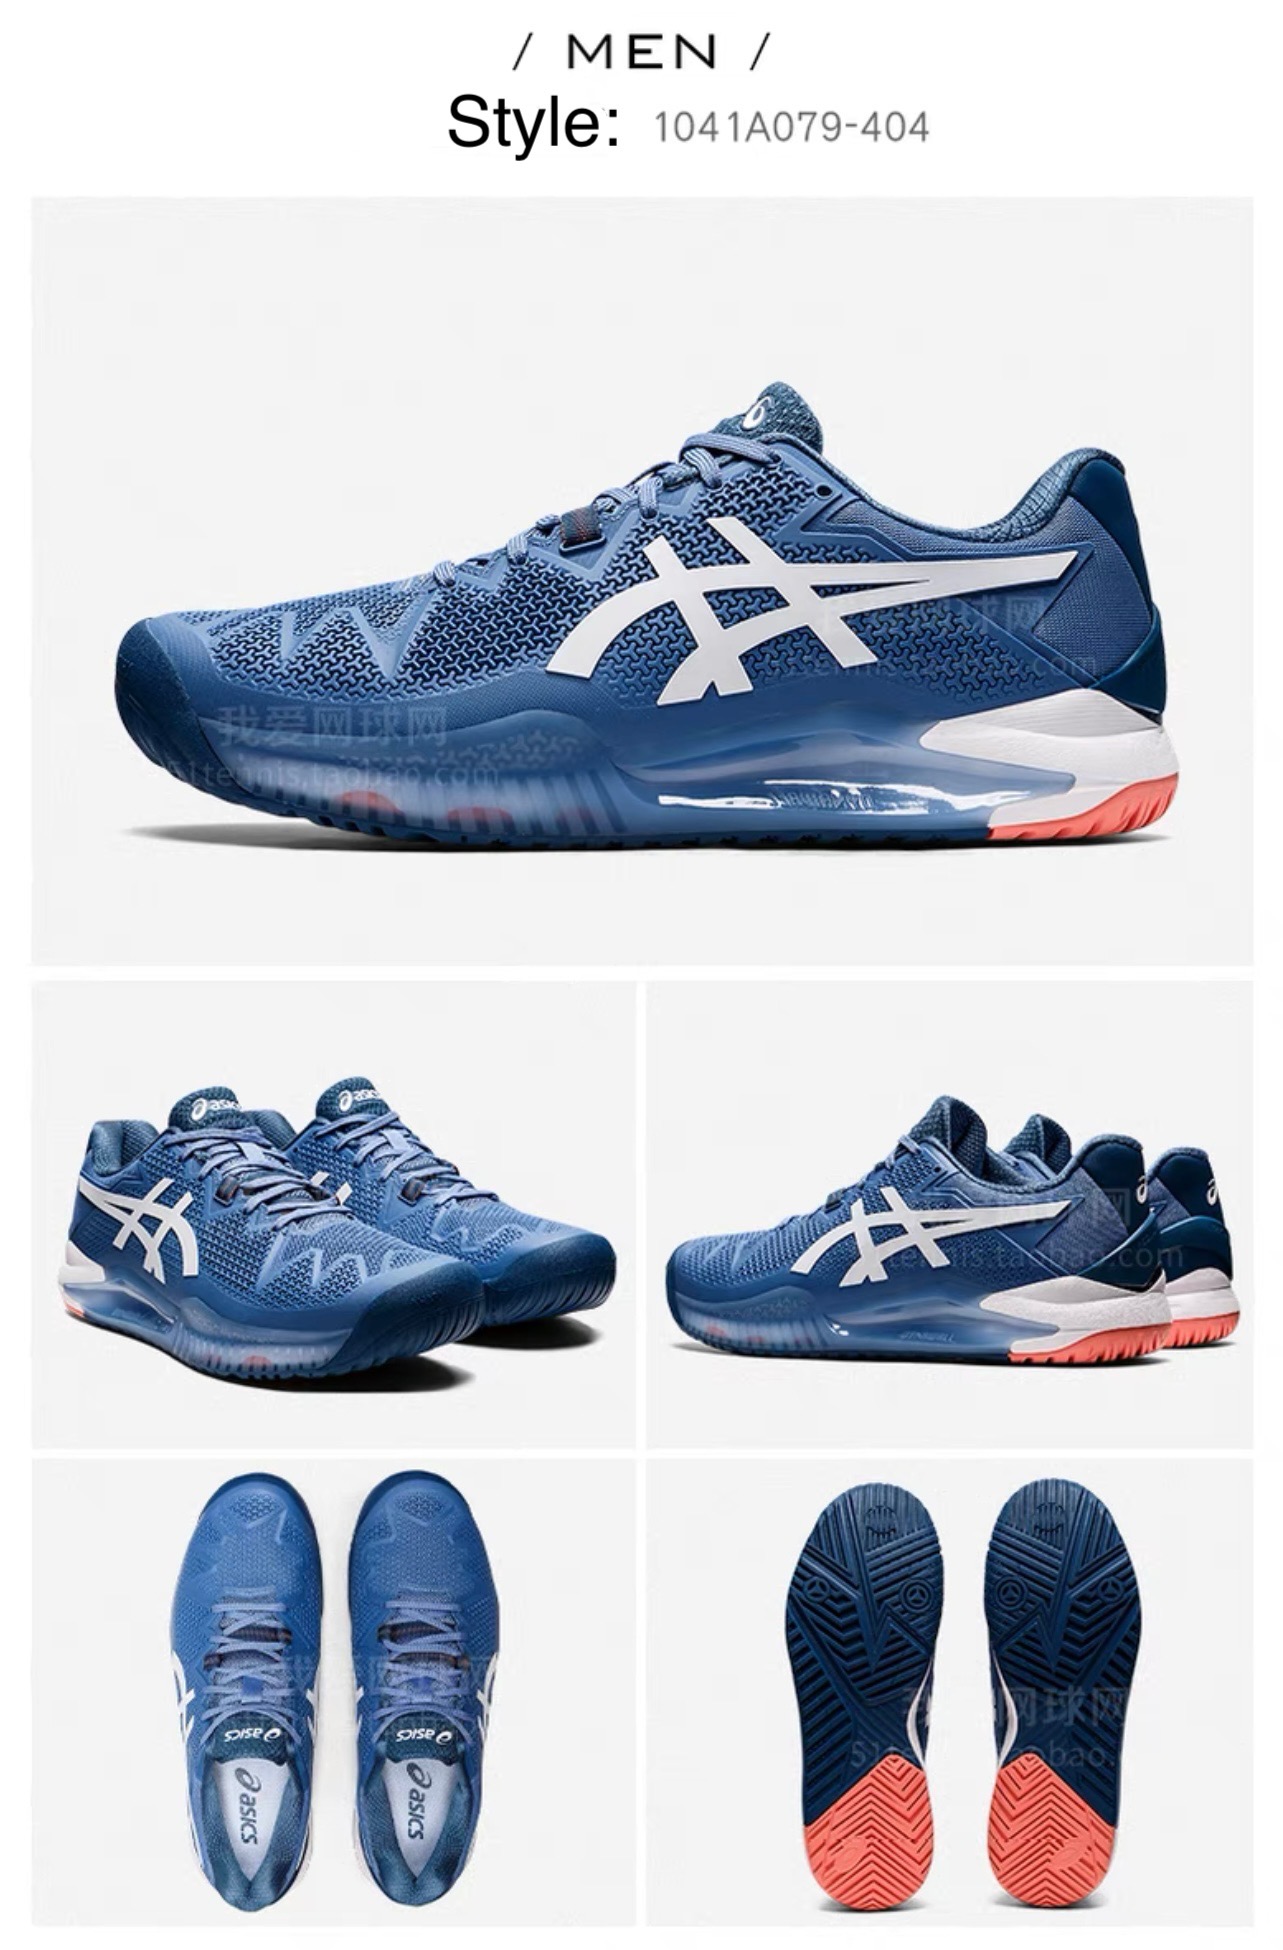 Asics Tennis Shoes GEL RESOLUTION 9 LIMITED EDITION Asics Blue 1041A443 400  NEW